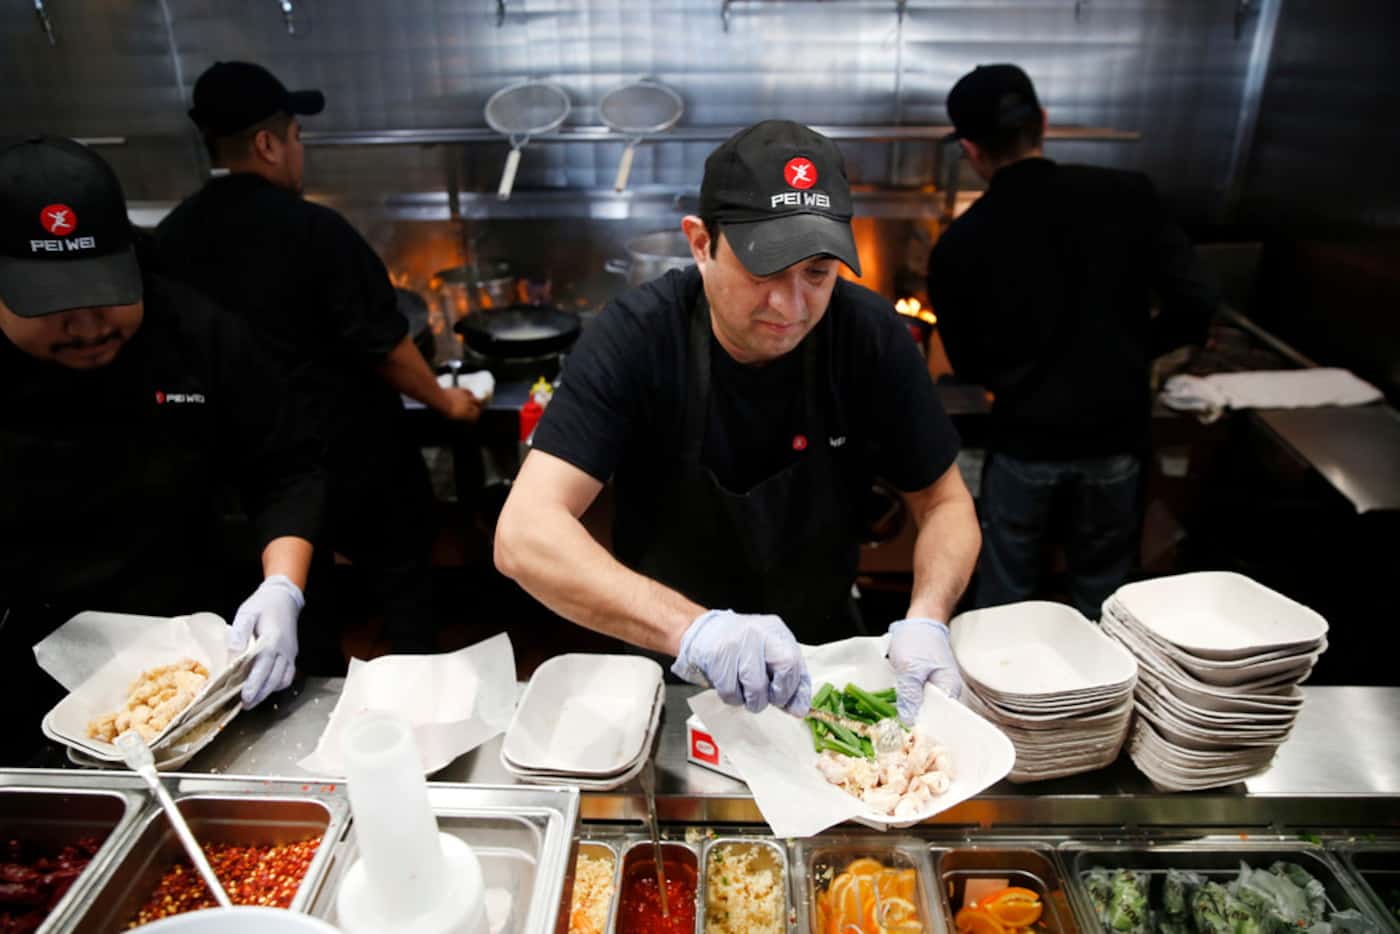 Gustavo Franco, wok cook, prepared a dish at Pei Wei in Irving on Feb. 7.